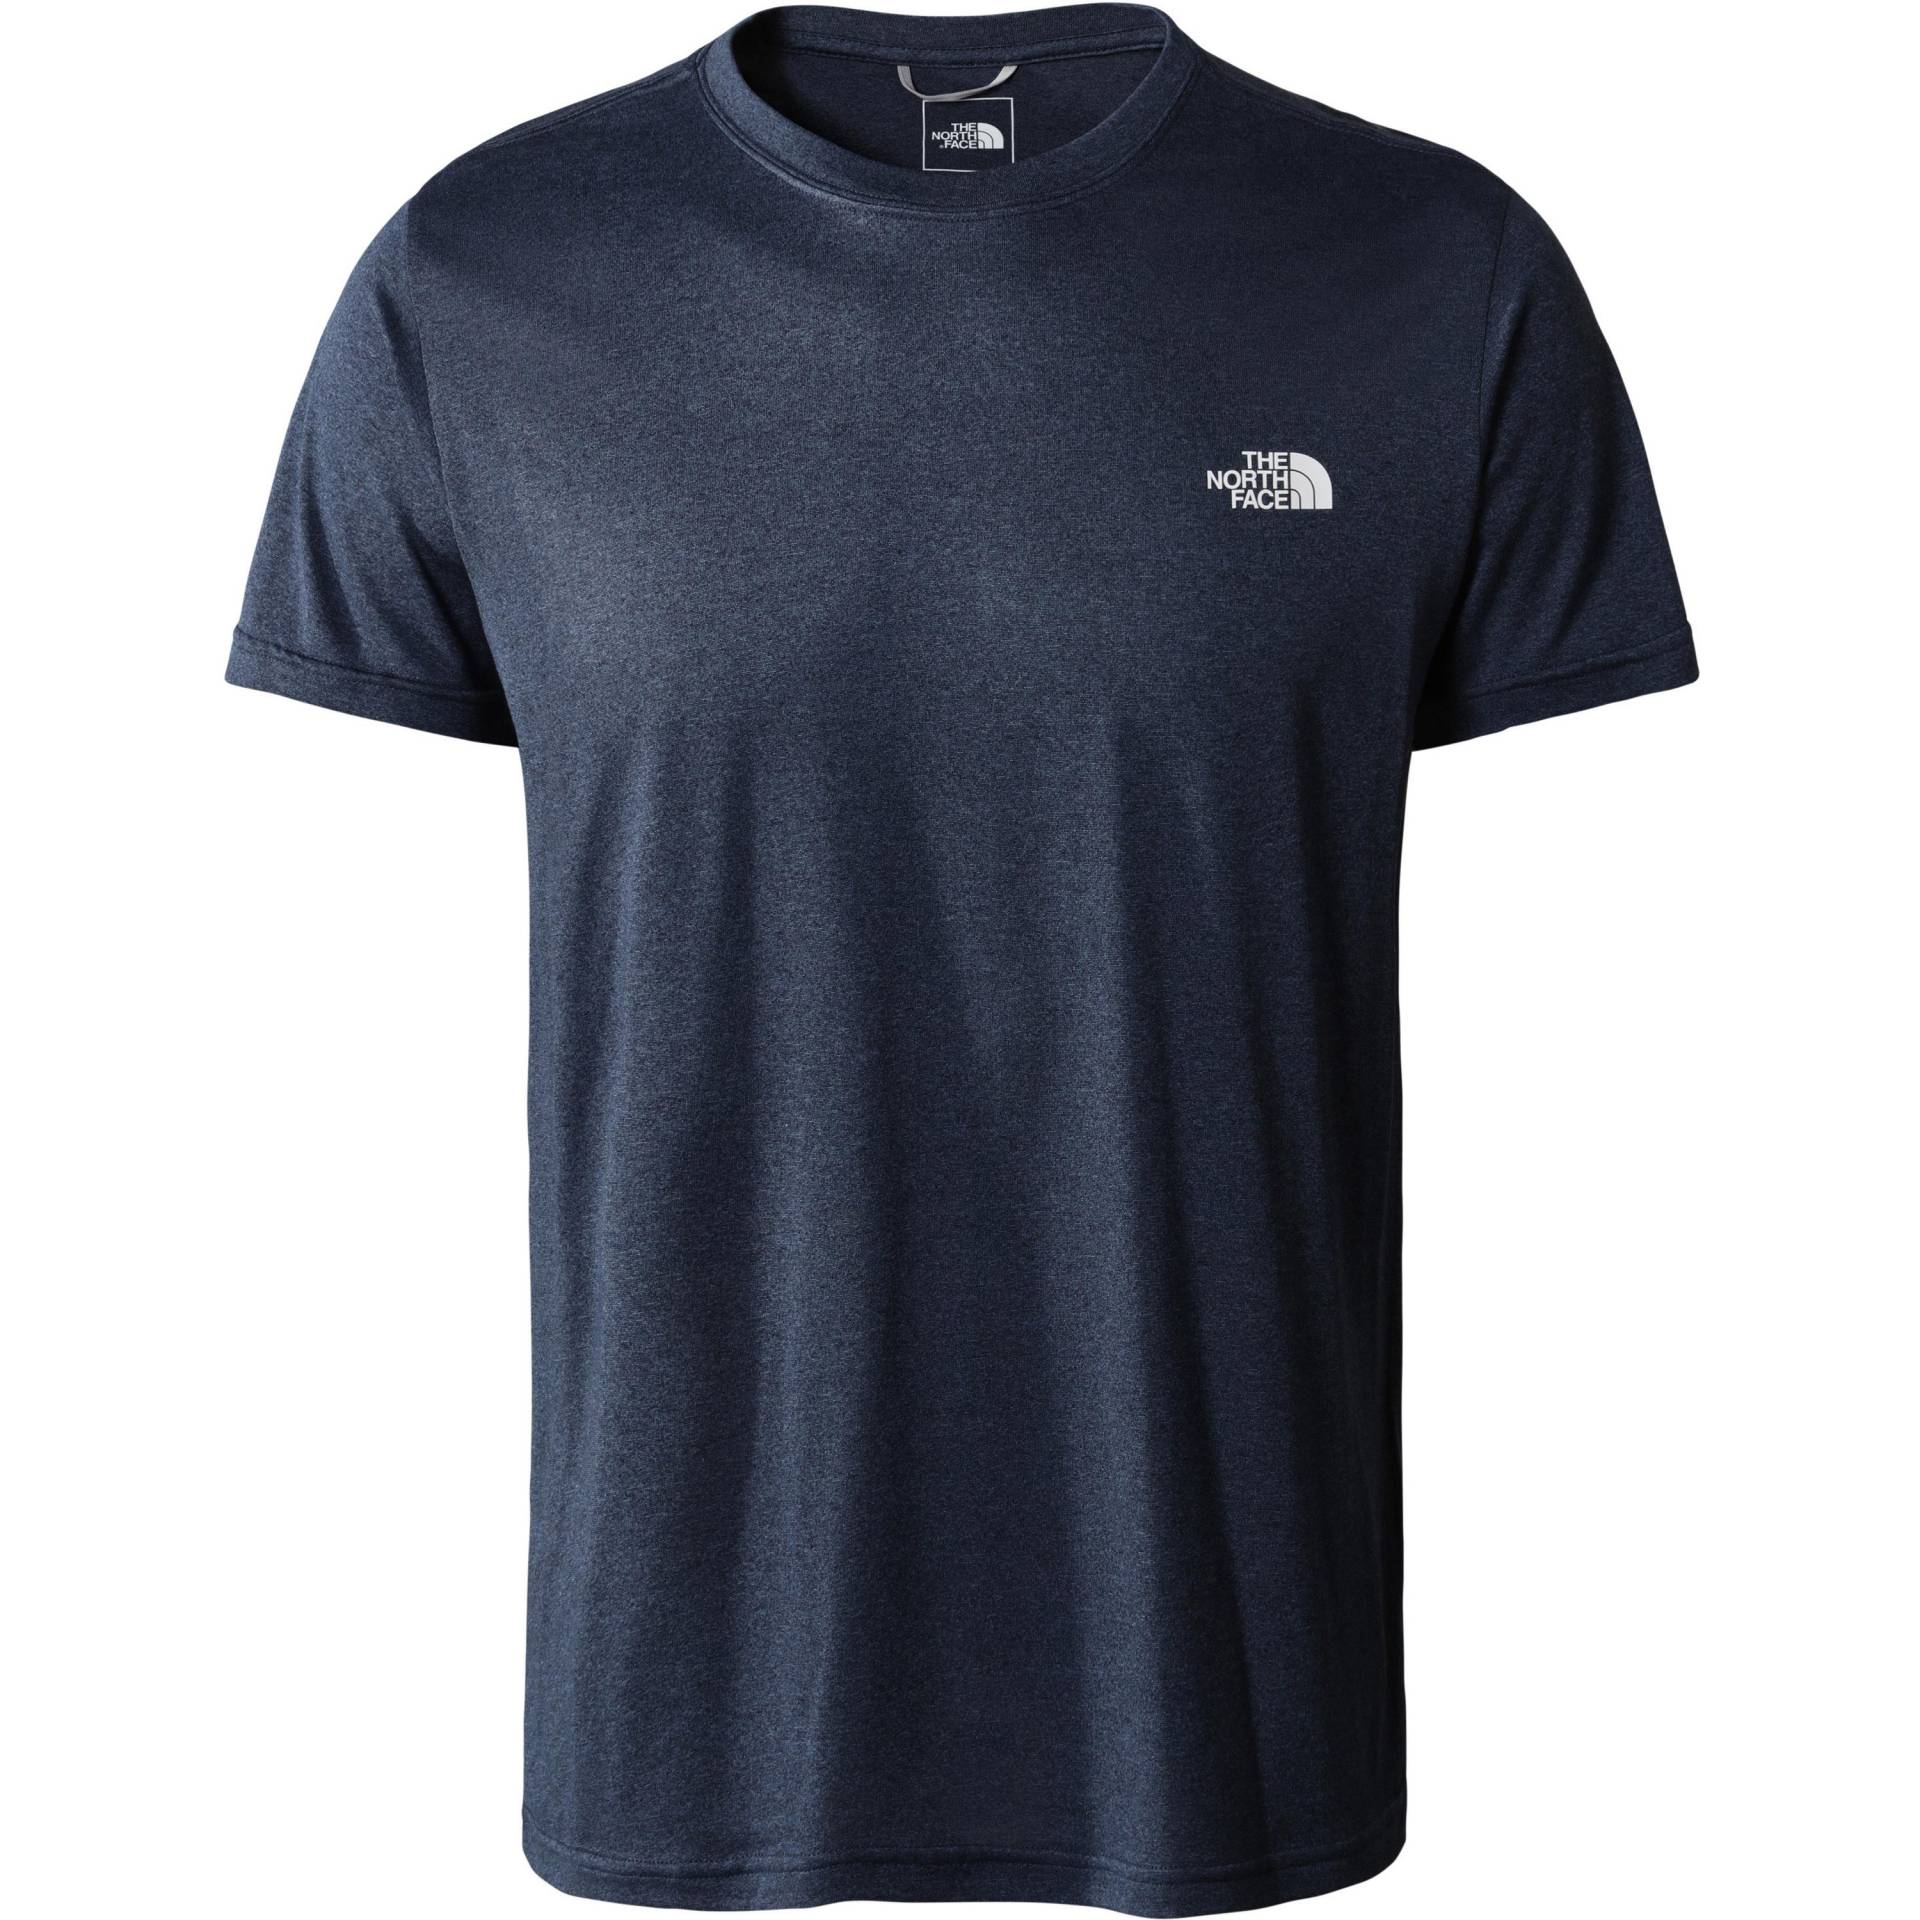 The North Face Reaxion Amp Funktionsshirt Herren von The North Face